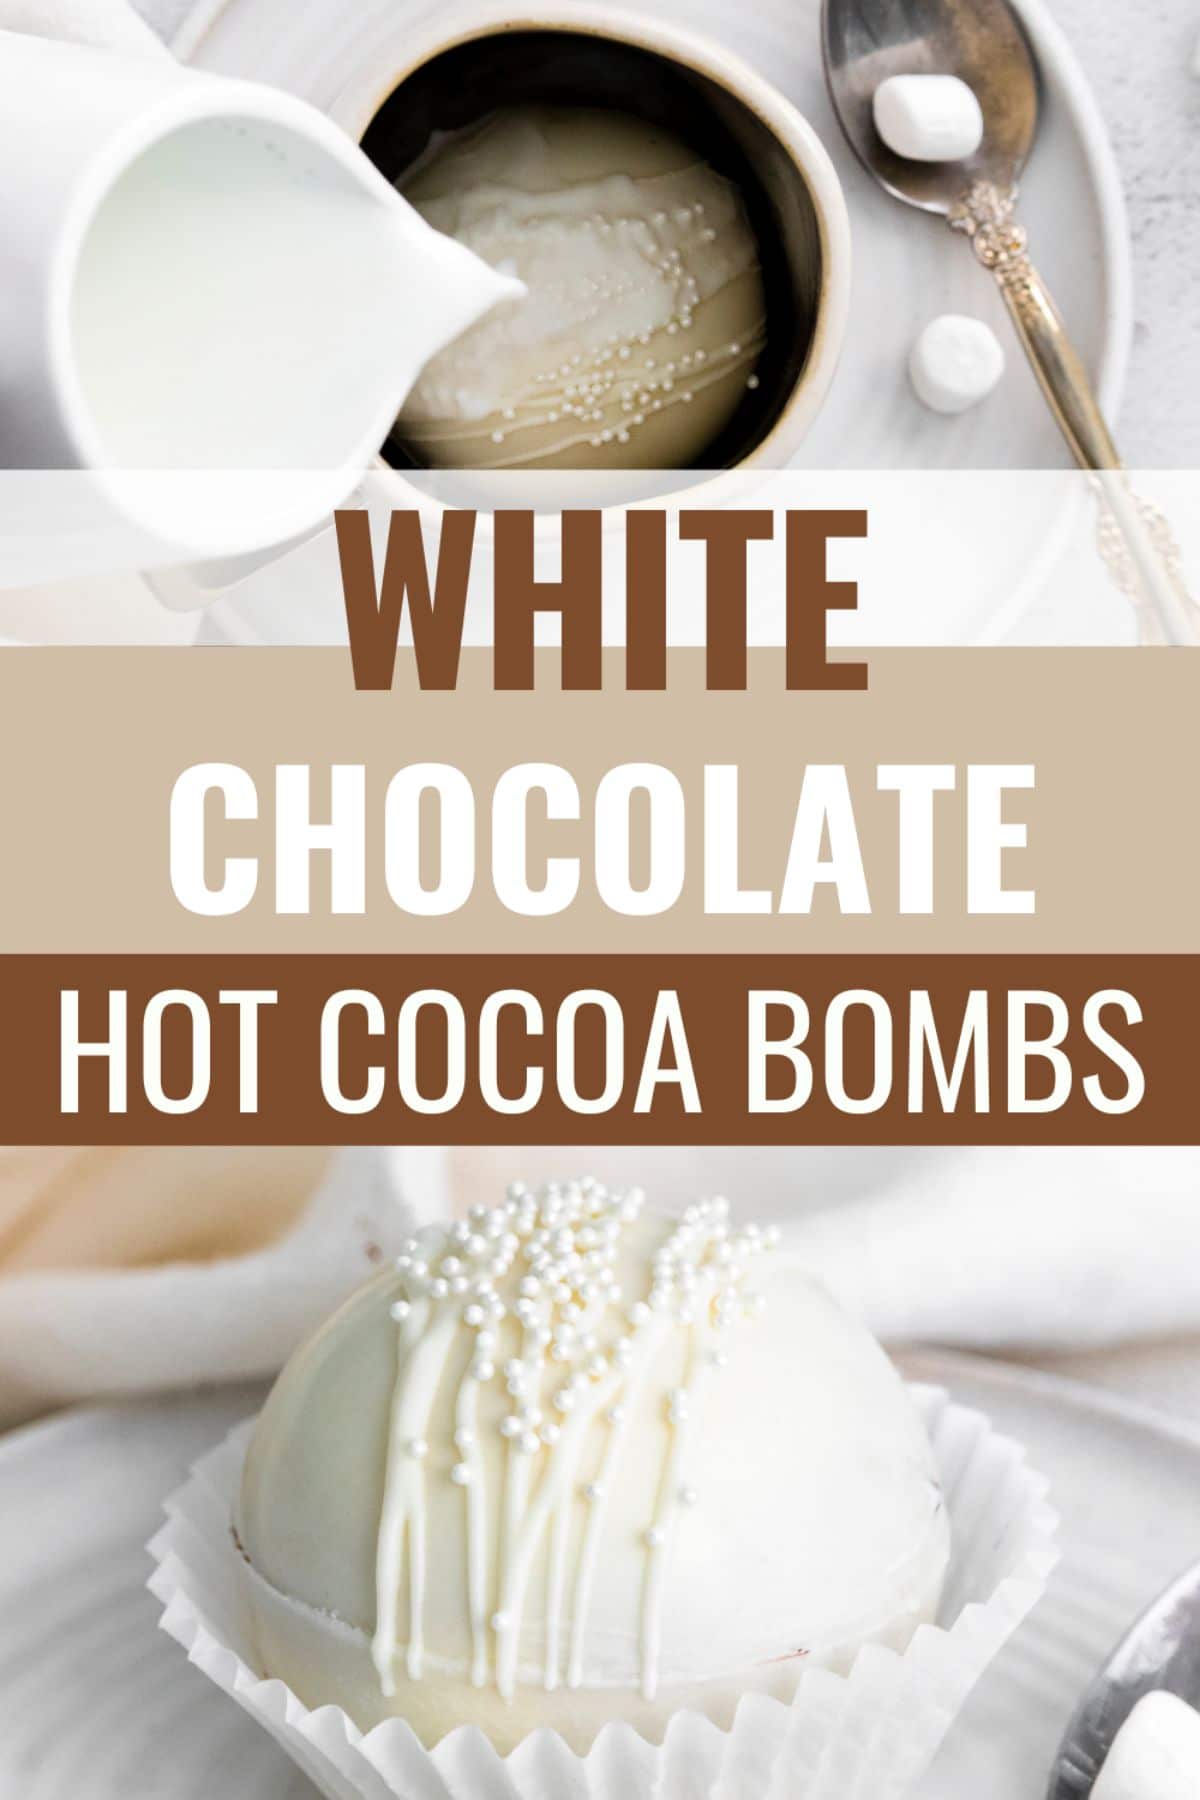 This White Chocolate Hot Cocoa Bomb is the perfect white chocolate twist on a traditional cocoa bomb. It reminds me of freshly fallen snow. #hotcocoabomb #hotcocoa #whitechocolate #recipe #cocoabomb via @wondermomwannab